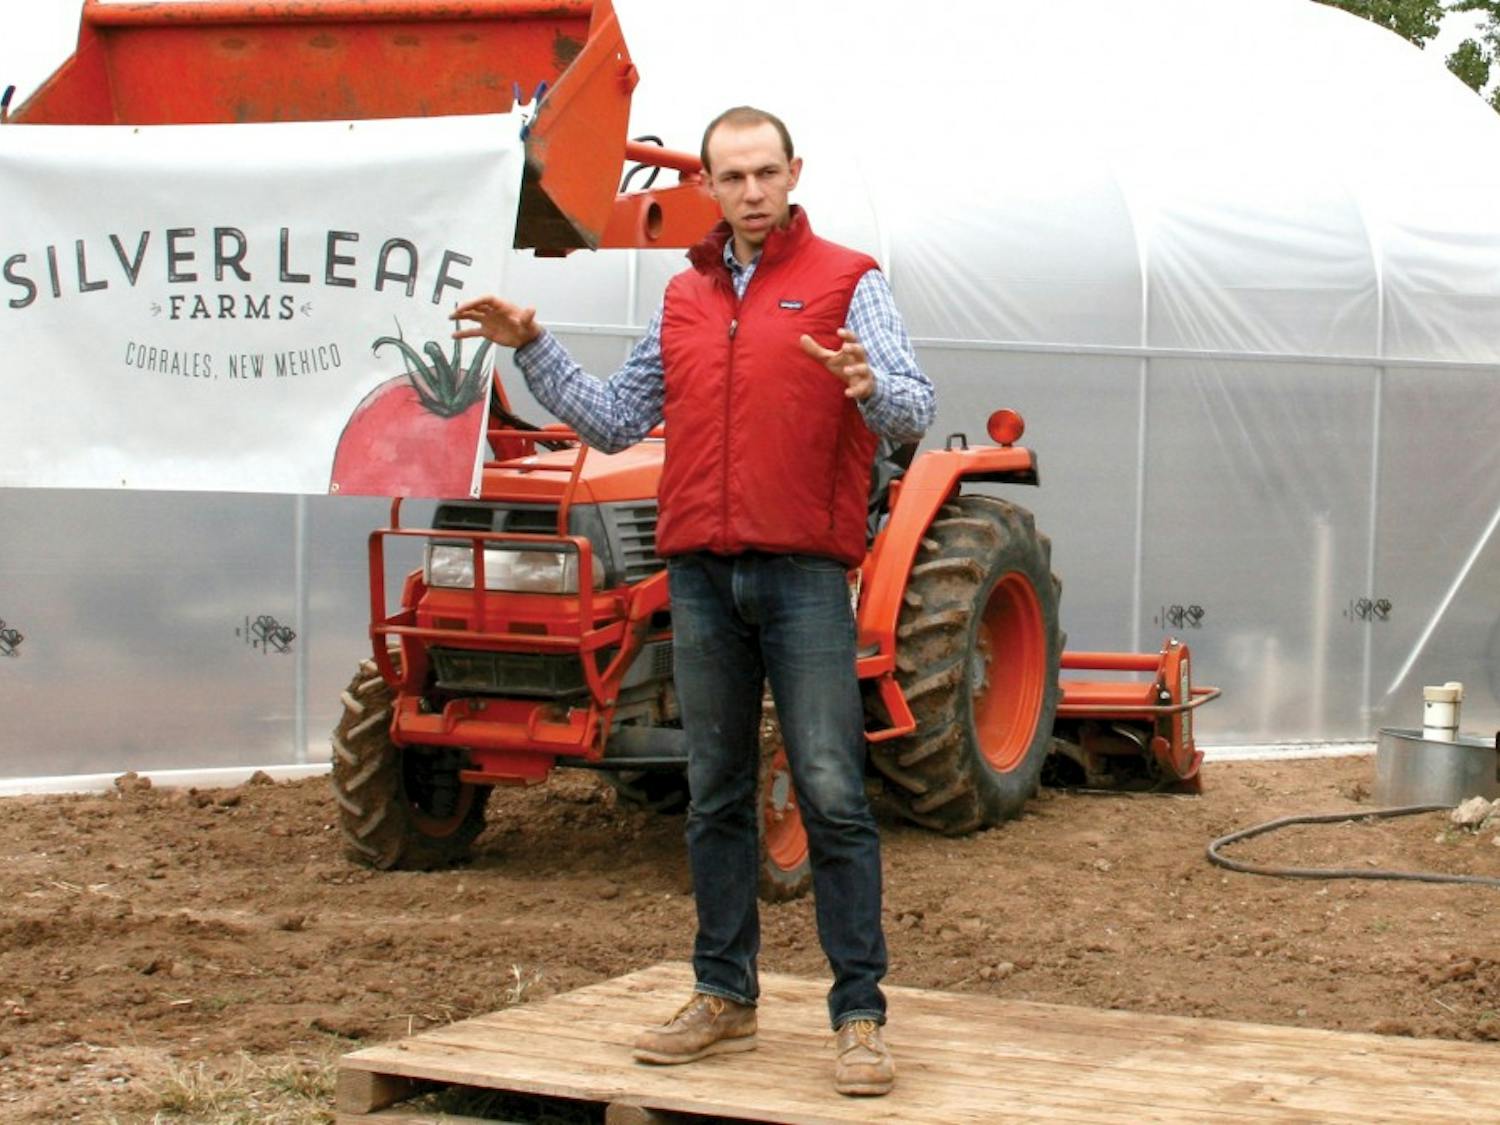 Elan Silverblatt-Buser speaks at Silver Leaf Farm, a farm started by him and his brother Aaron. Silver Leaf Farms currently has a 10,000 square foot green house that they hope to grow in year round. 